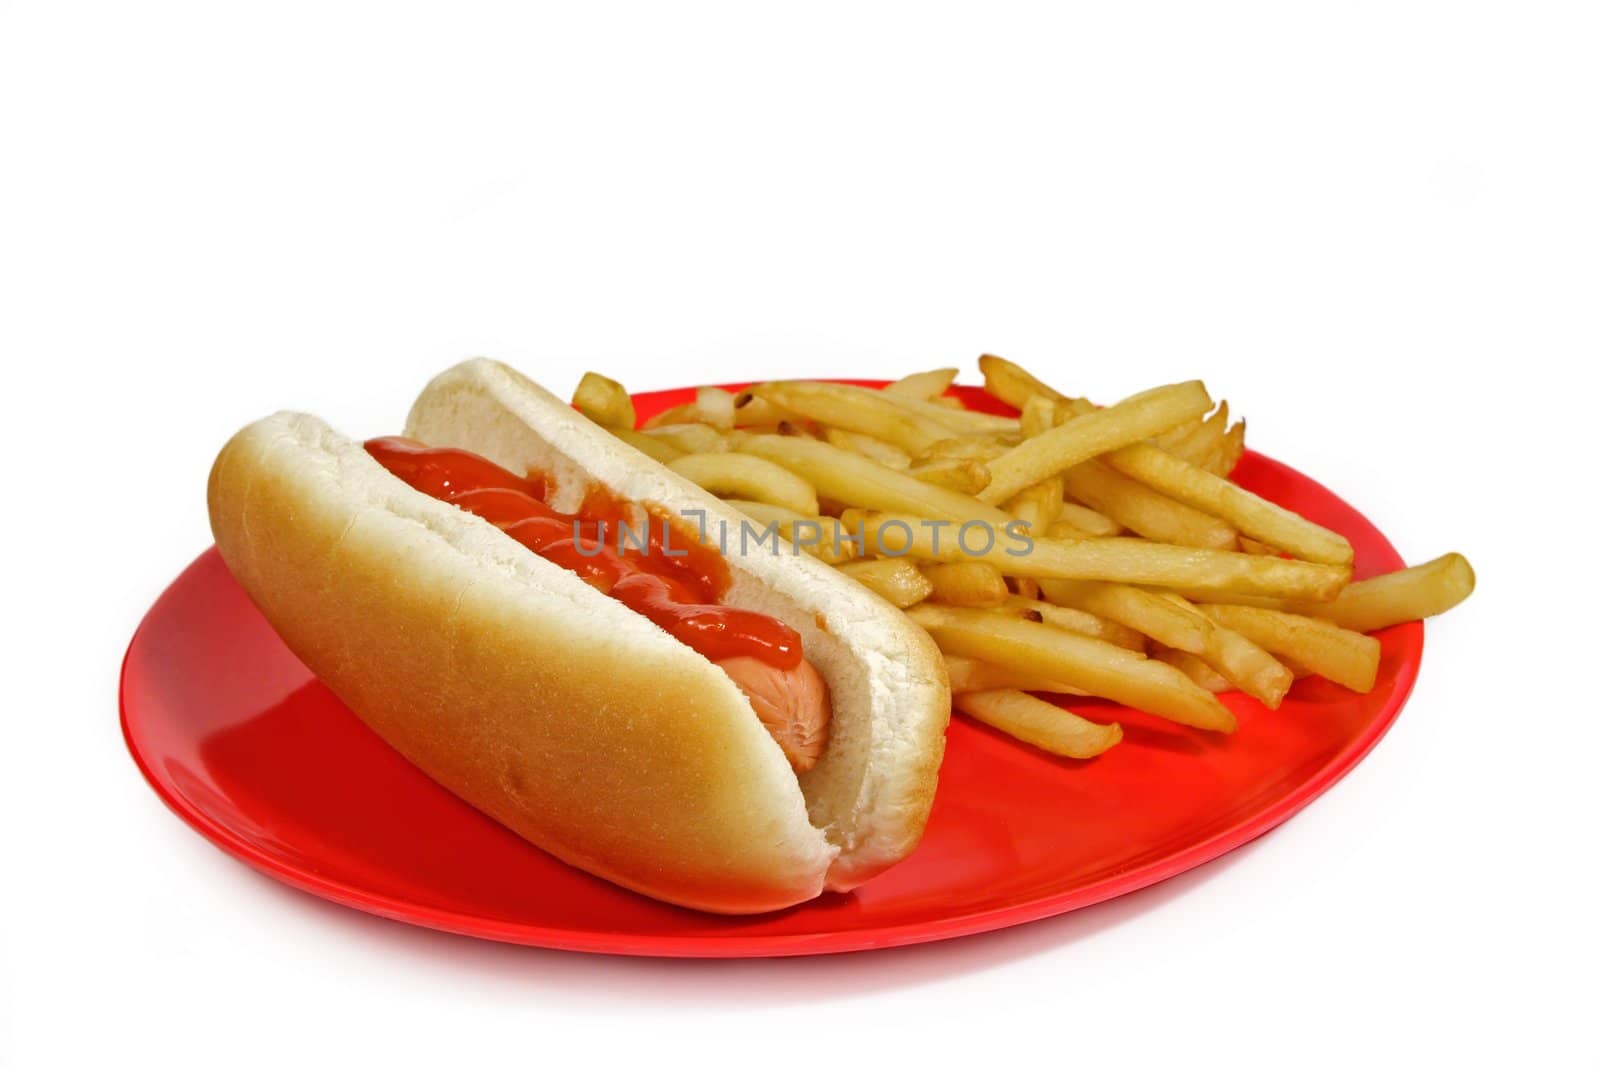 hot-dog and fries on a red plate